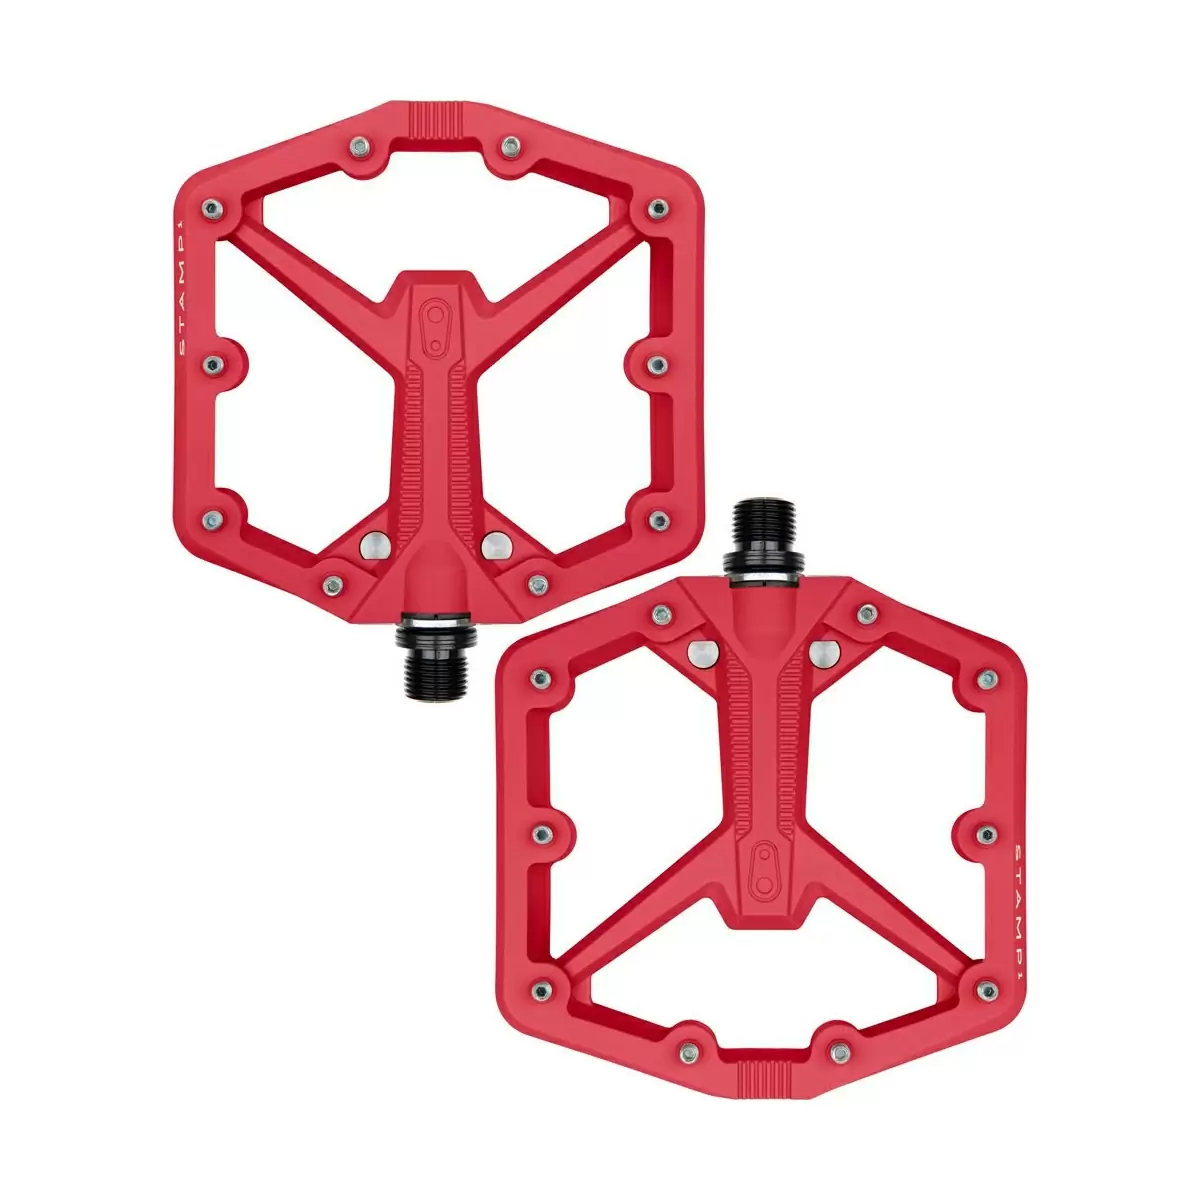 Stamp 1 Gen 1 - Small – Crankbrothers